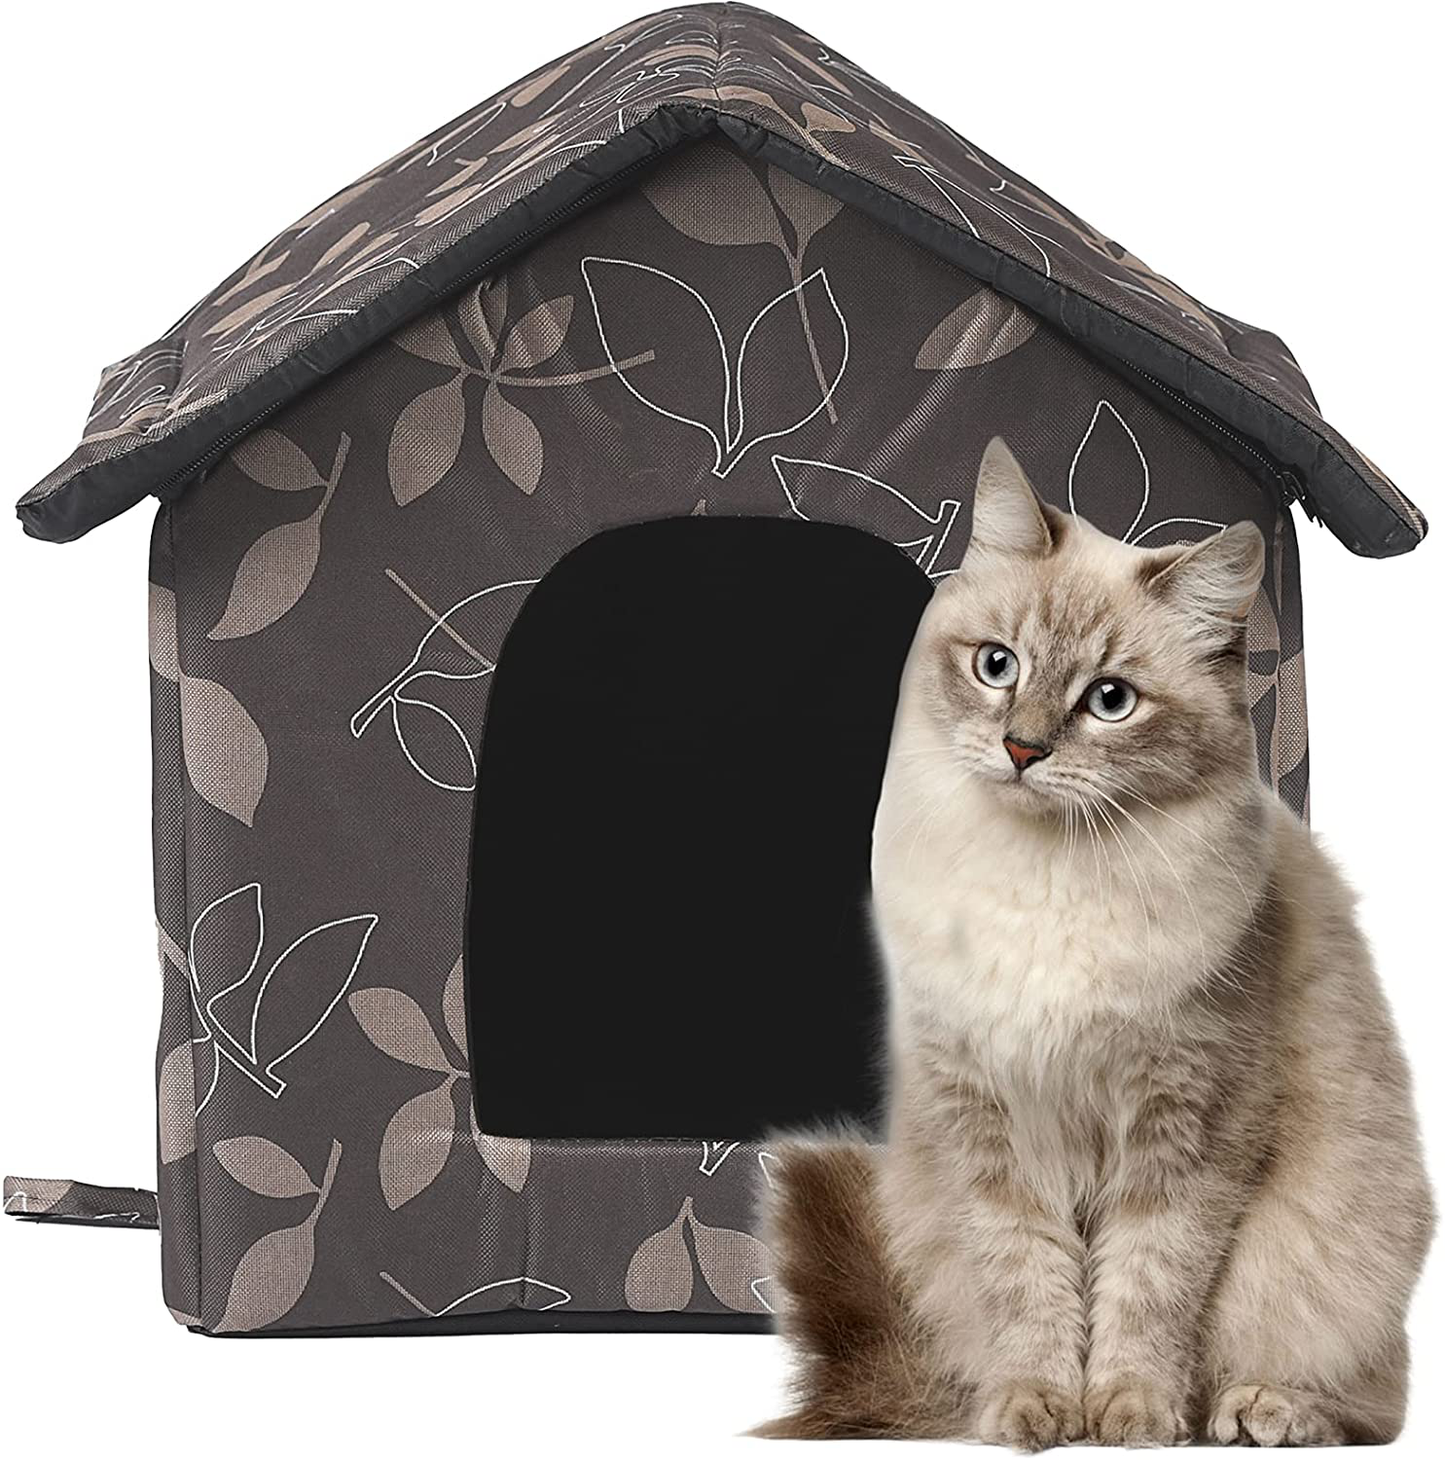 KUDES Cat House with Removable Cushion, Four Season Pet Nest Kitty Shelter with Waterproof Canvas Roof, Washable and Foldable Feral Cat Kennel Cave House Small Dog Tent Cabin for Indoor Outdoor